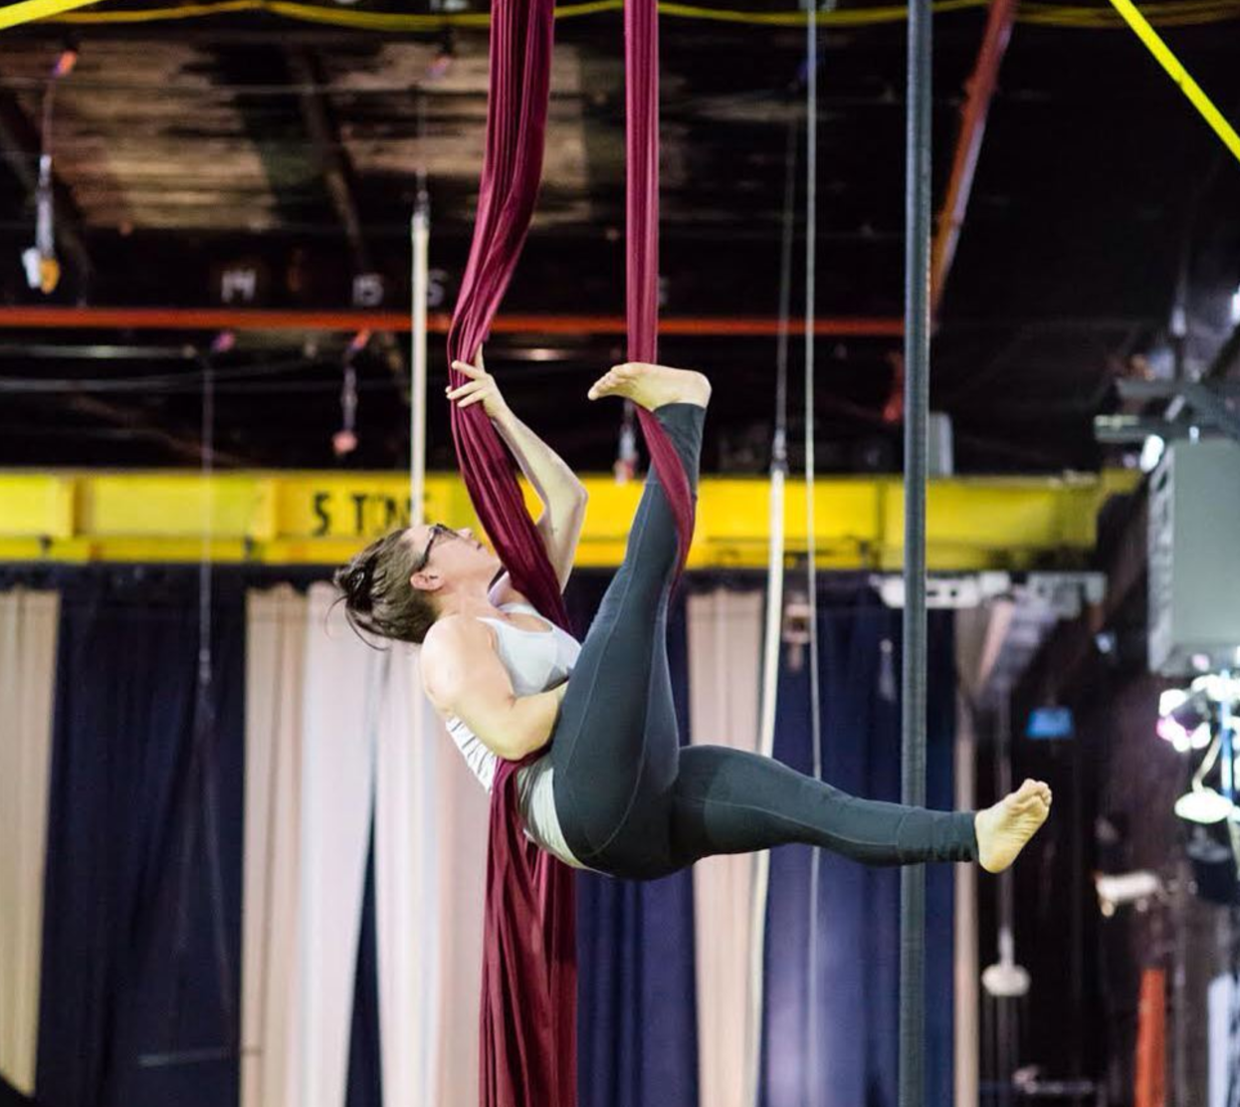 Bookworms, the Brooklyn Book Festival Comes to Bushwick Tonight with Aerialists and Authors!